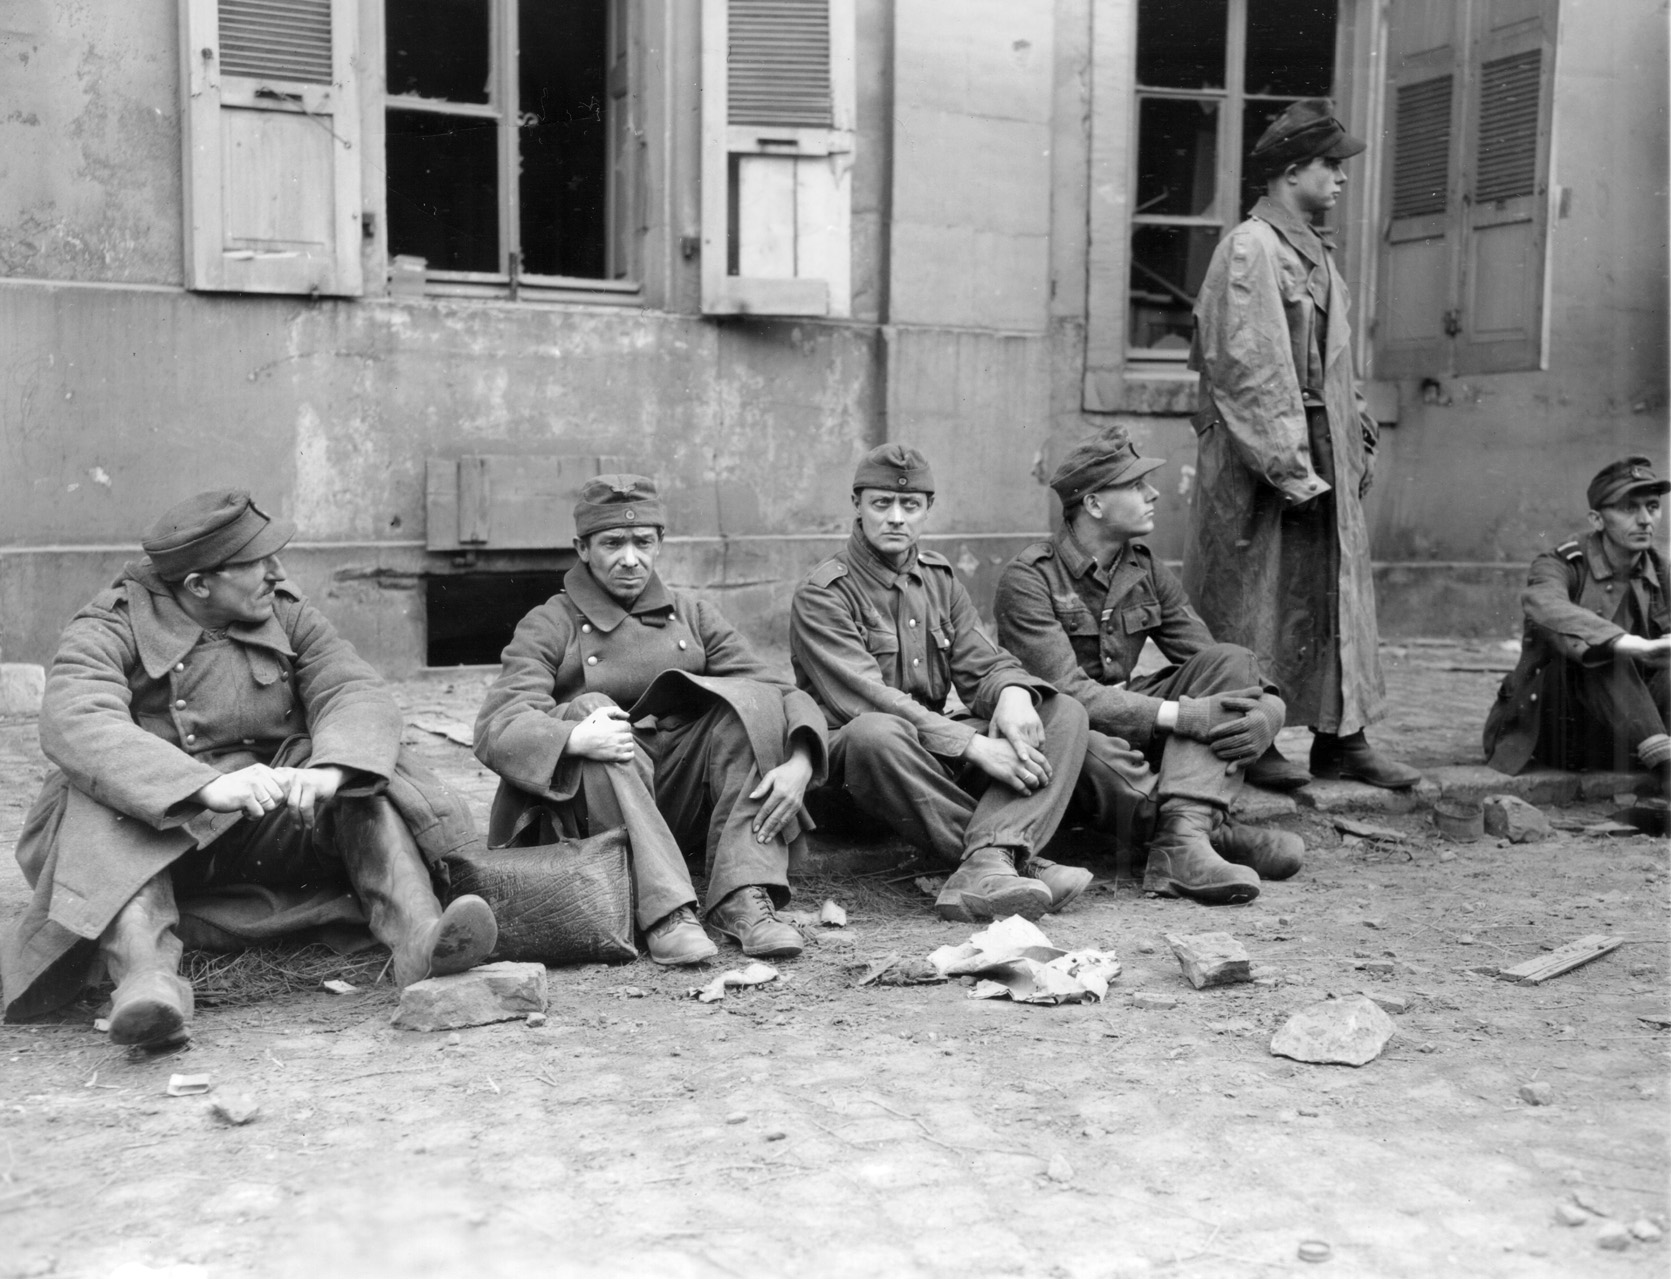 German soldiers captured when 3rd Division troops secured a town sit streetside and await instructions from their captors. These men were sniping at the Americans and were lucky to survive. 